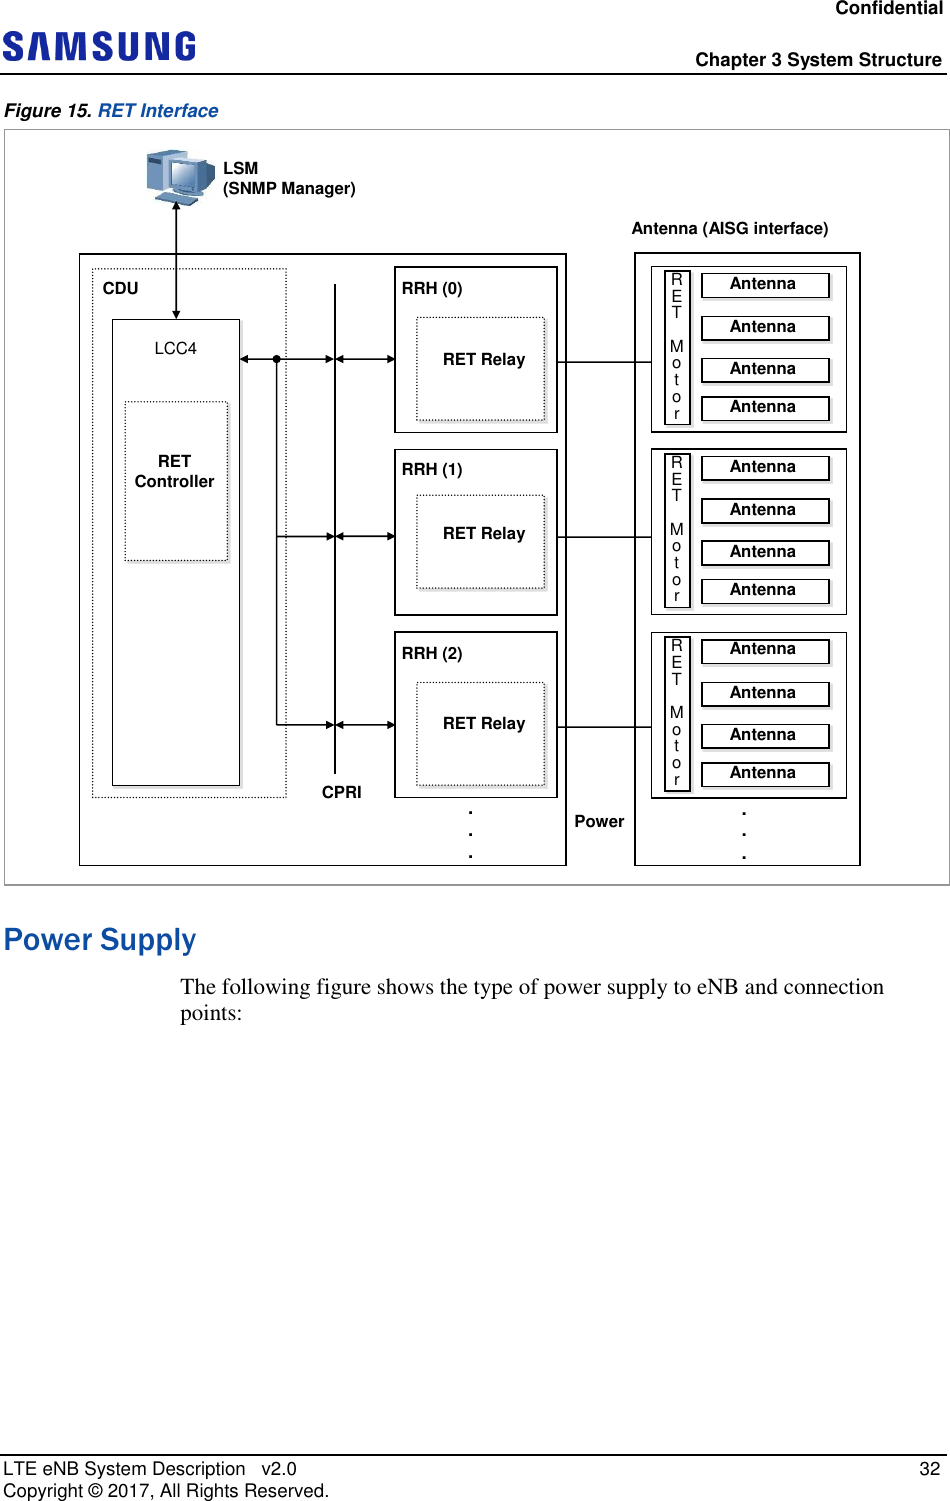 Confidential  Chapter 3 System Structure LTE eNB System Description   v2.0   32 Copyright ©  2017, All Rights Reserved. Figure 15. RET Interface  Power Supply The following figure shows the type of power supply to eNB and connection points: CPRI CDU LCC4   Power LSM (SNMP Manager) . . . Antenna (AISG interface) . . . RRH (0) RET Relay RRH (1)  RET Relay RRH (2)  RET Relay RET Controller R E T  M o t o r R E T  M o t o r R E T  M o t o r Antenna Antenna Antenna Antenna Antenna Antenna Antenna Antenna Antenna  Antenna Antenna Antenna 